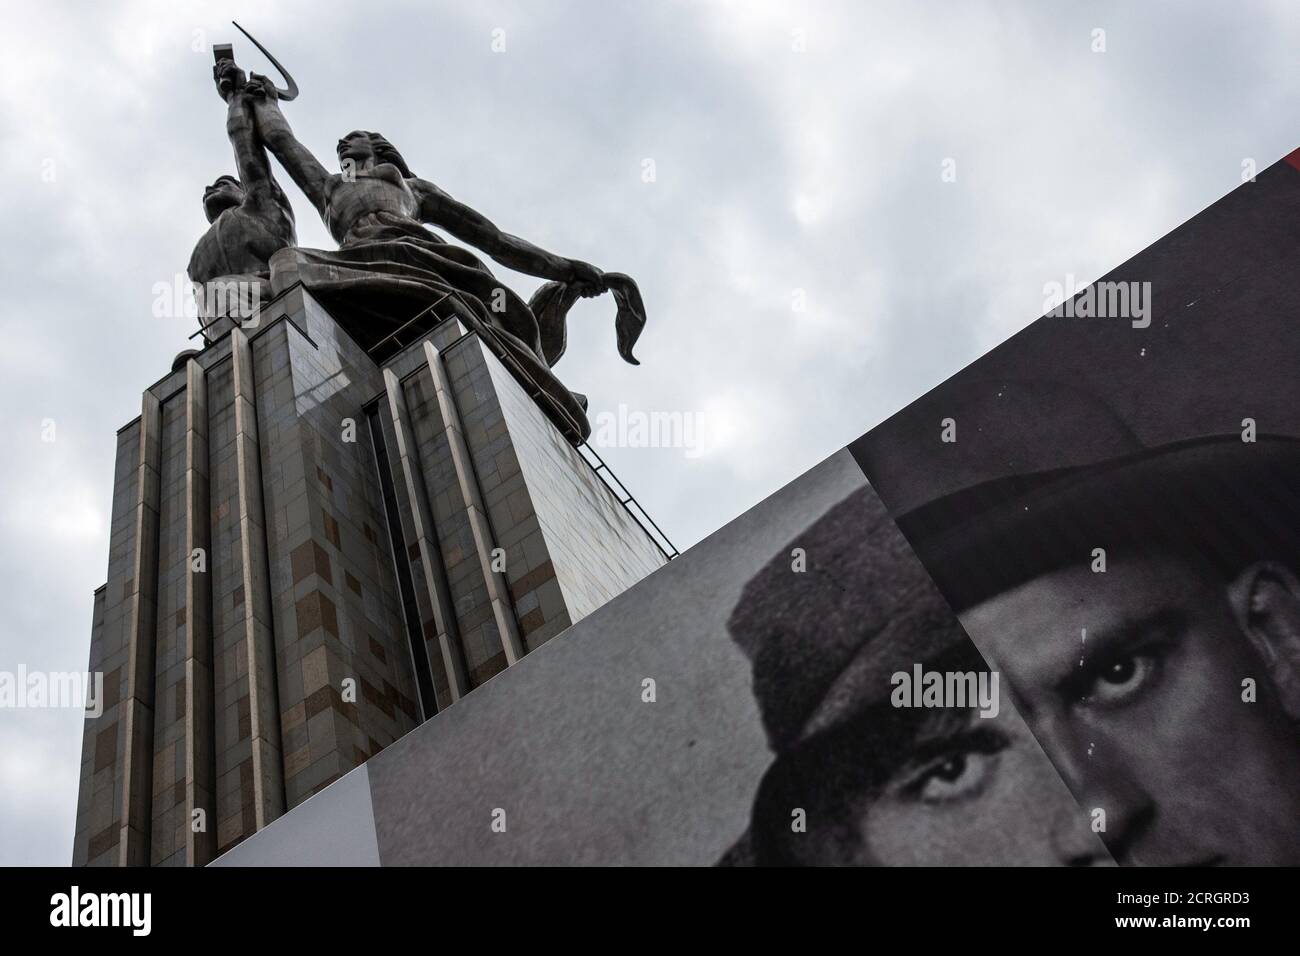 A picture of the Soviet poet Vladimir Mayakovsky is seen under the monument and sculpture of 'Worker and Kolkhoz Woman' in Moscow, Russia, July 10, 2018.  REUTERS/Damir Sagolj Stock Photo